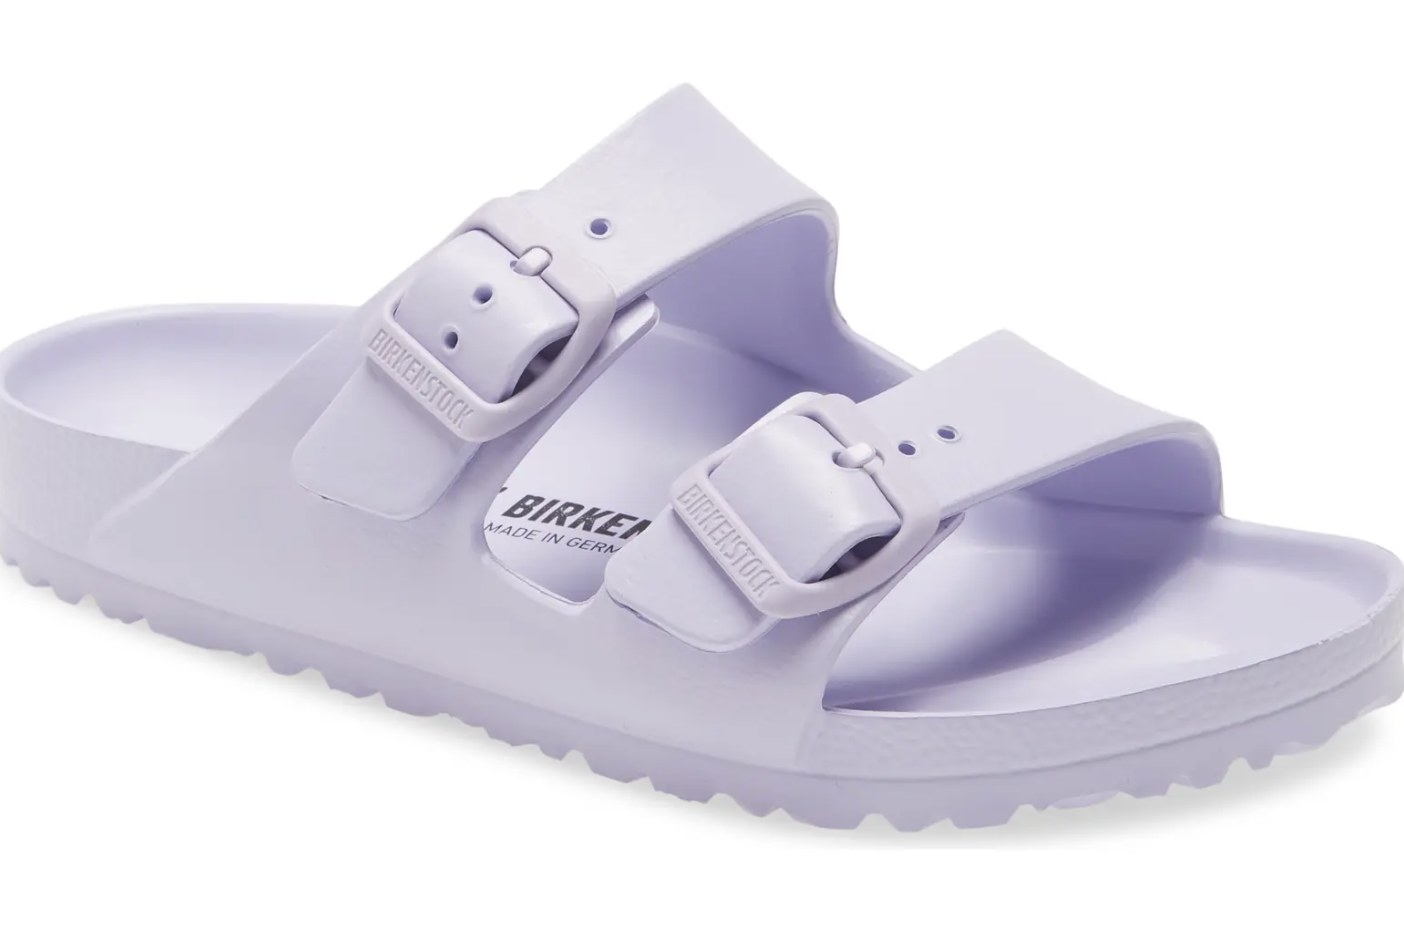 the sandals in purple